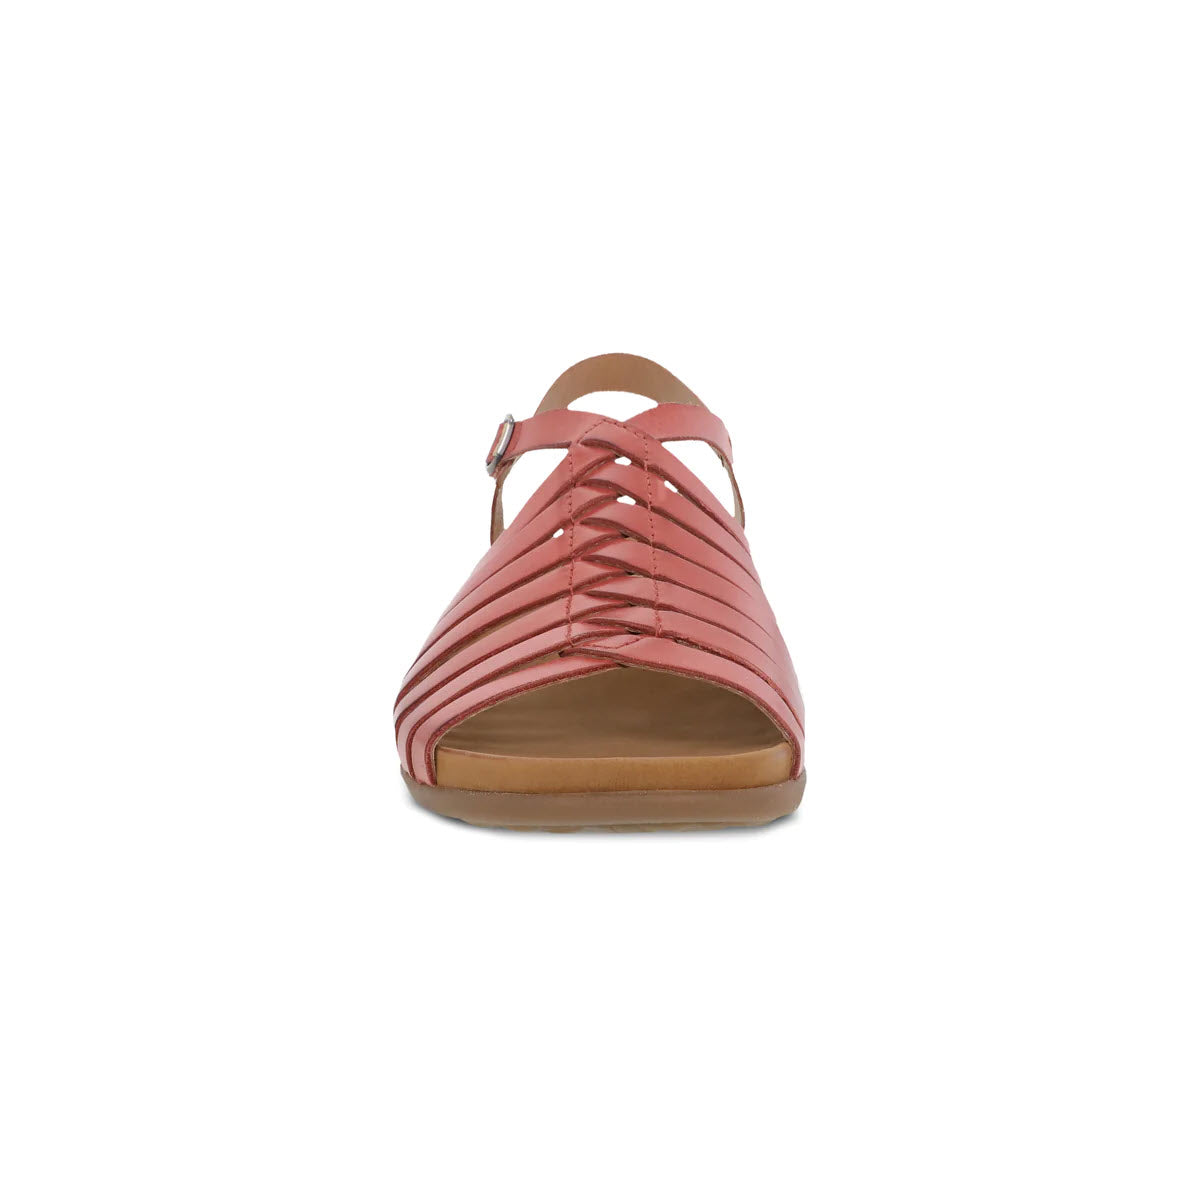 Front view of a coral pink strappy sandal with a cushioned sole, isolated on a white background featuring the Dansko Jennifer Clay - Womens sandal.